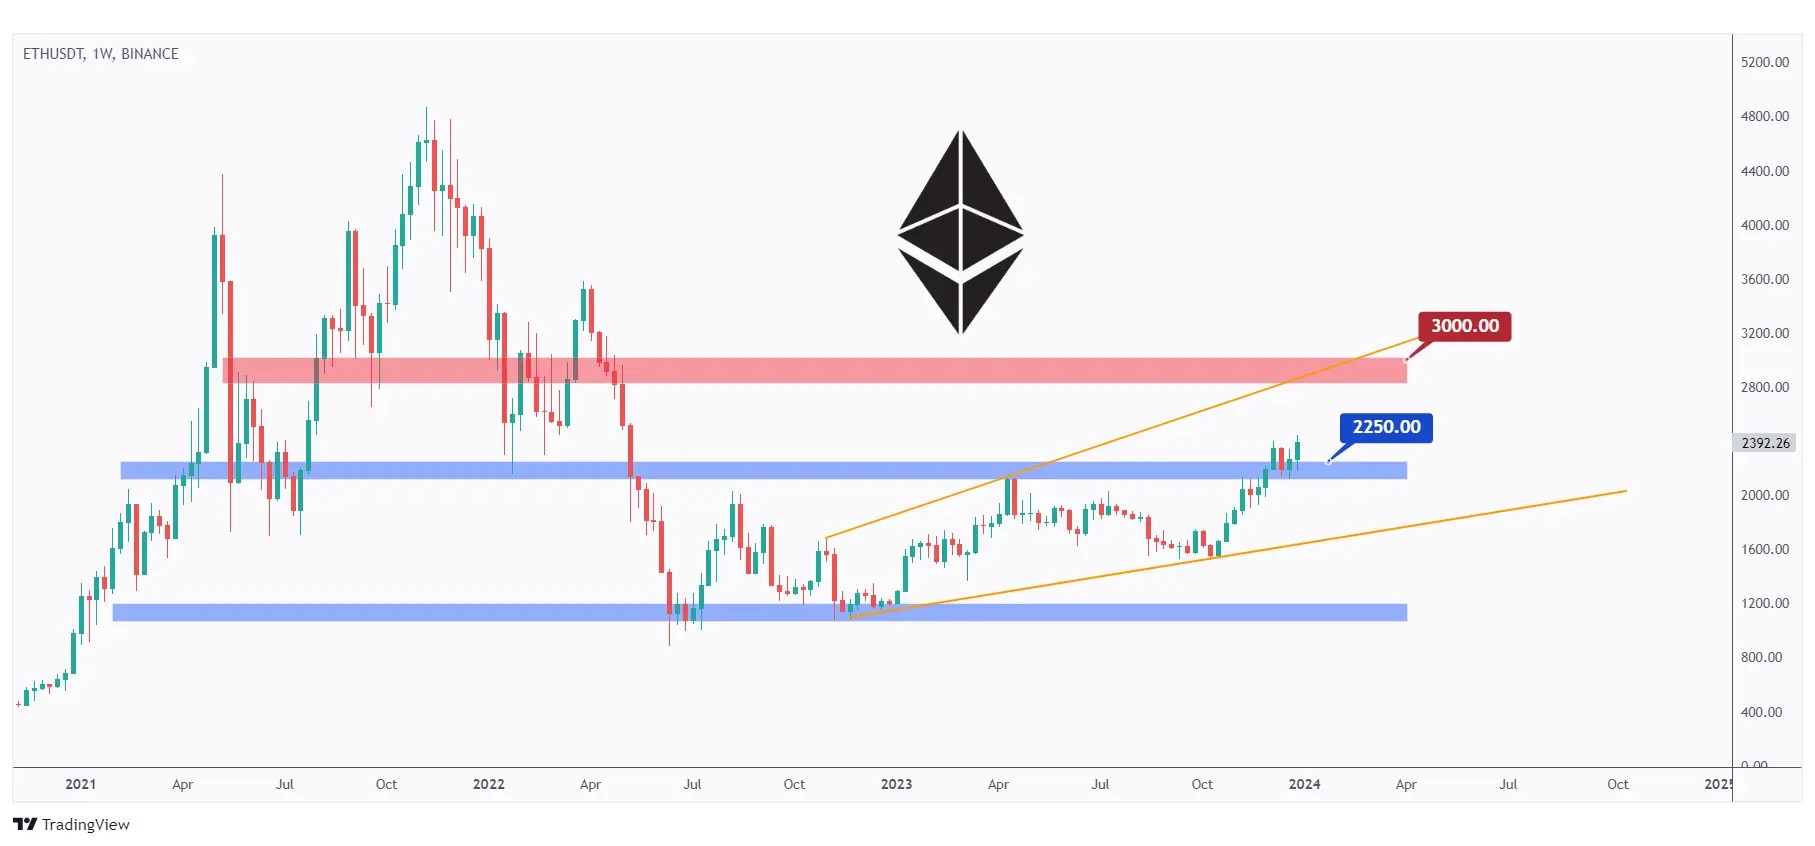 Ethereum weekly chart breaking above the $2250 resistance now acting as support